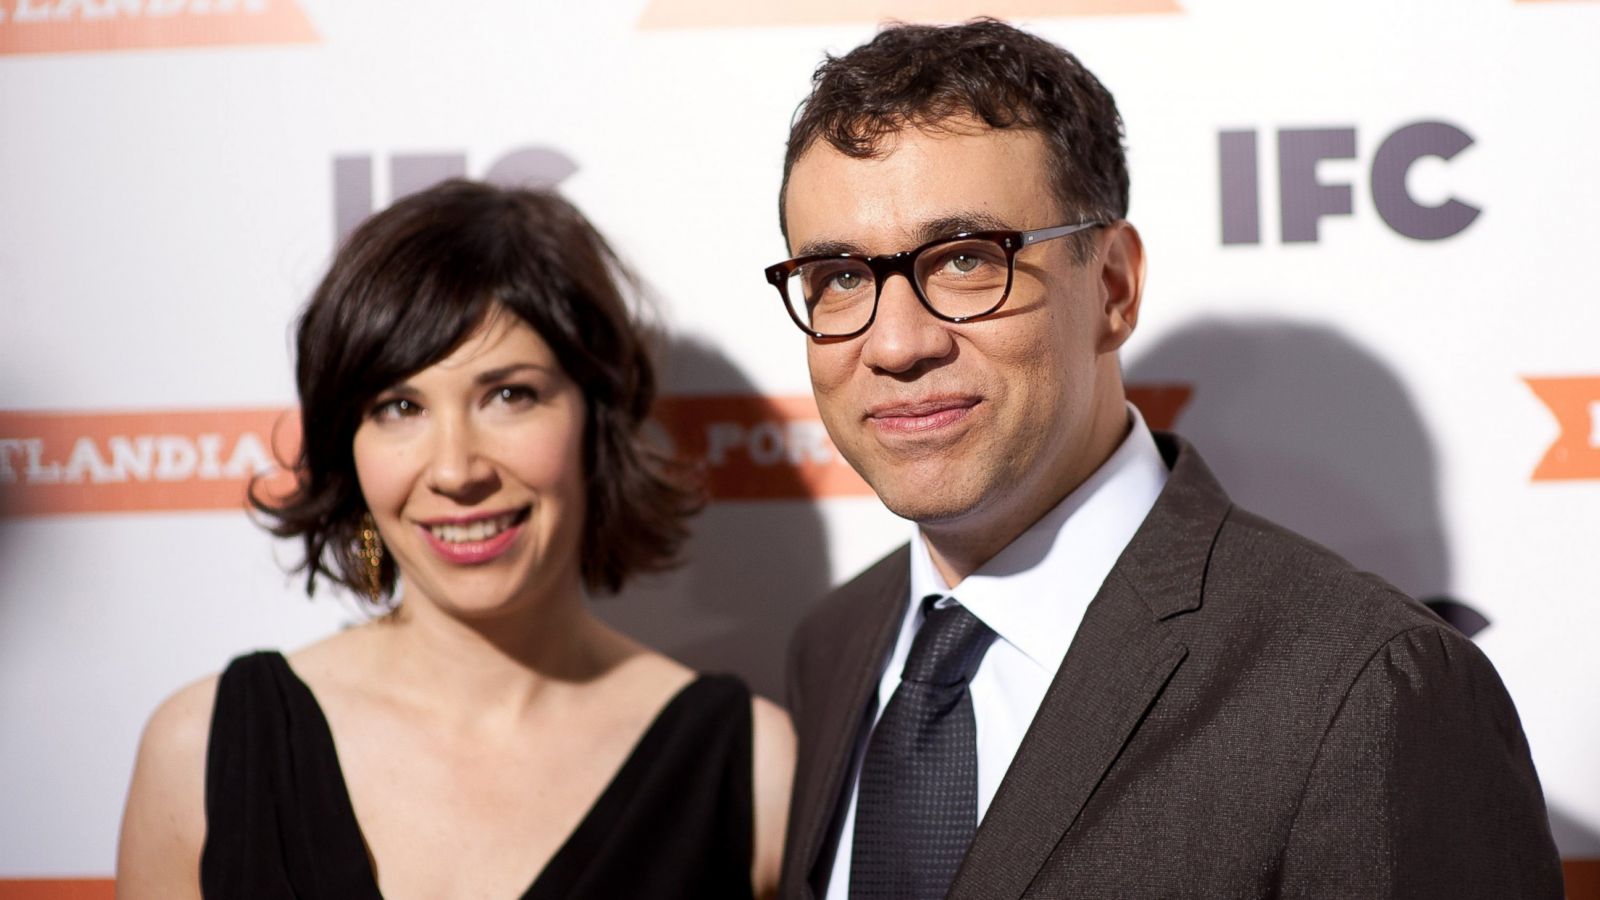 Fred Armisen on 'Portlandia' ending: 'There are no goodbyes'